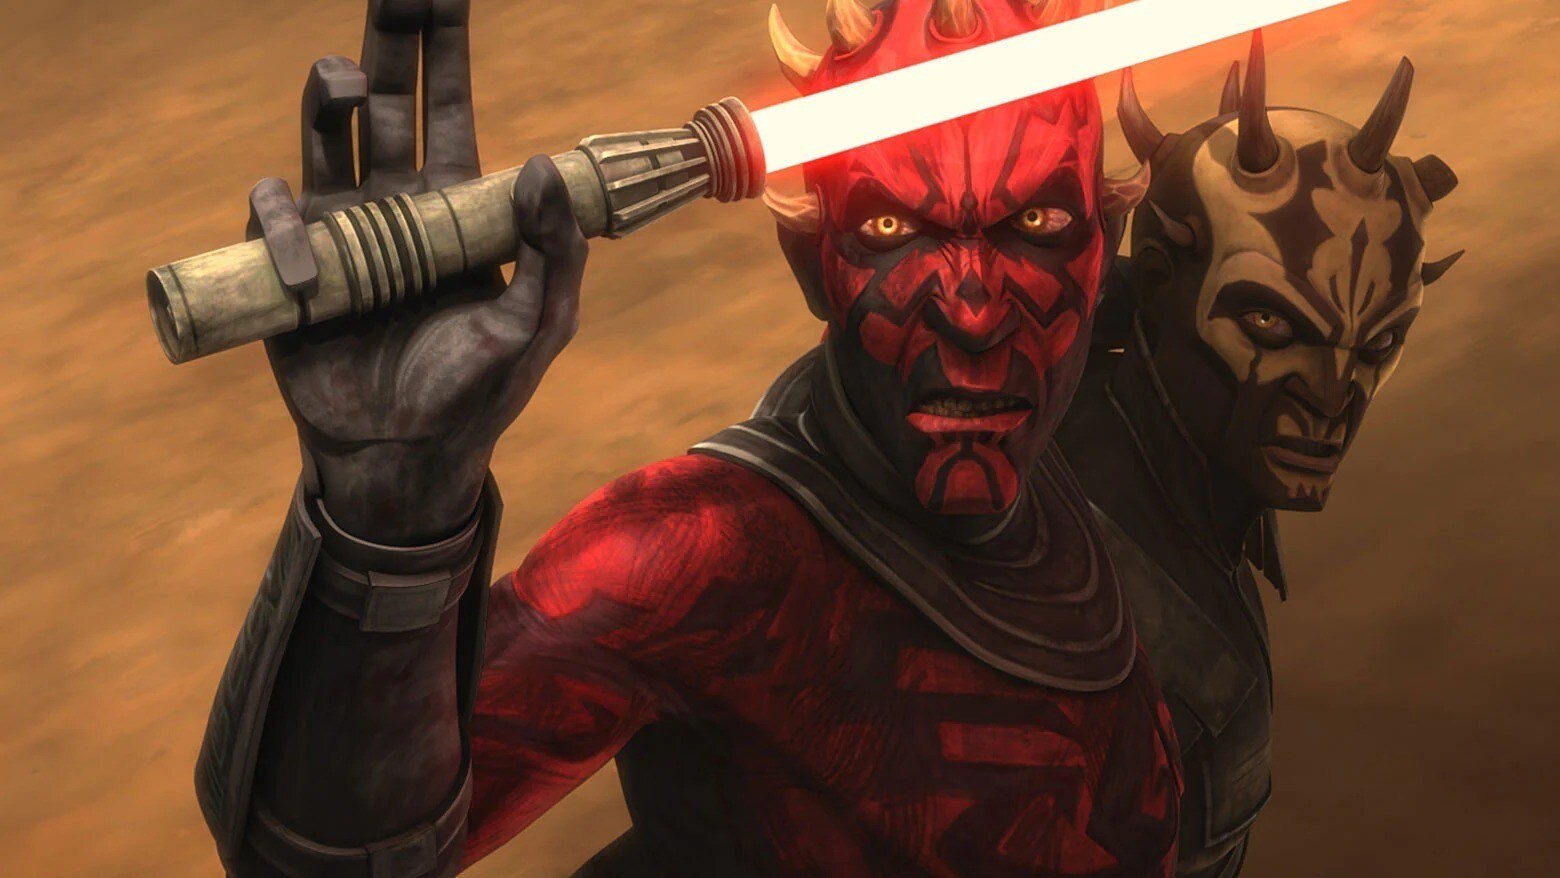  Darth Maul with red light saber and Savage Opress from The Clone Wars episode, "Revival"